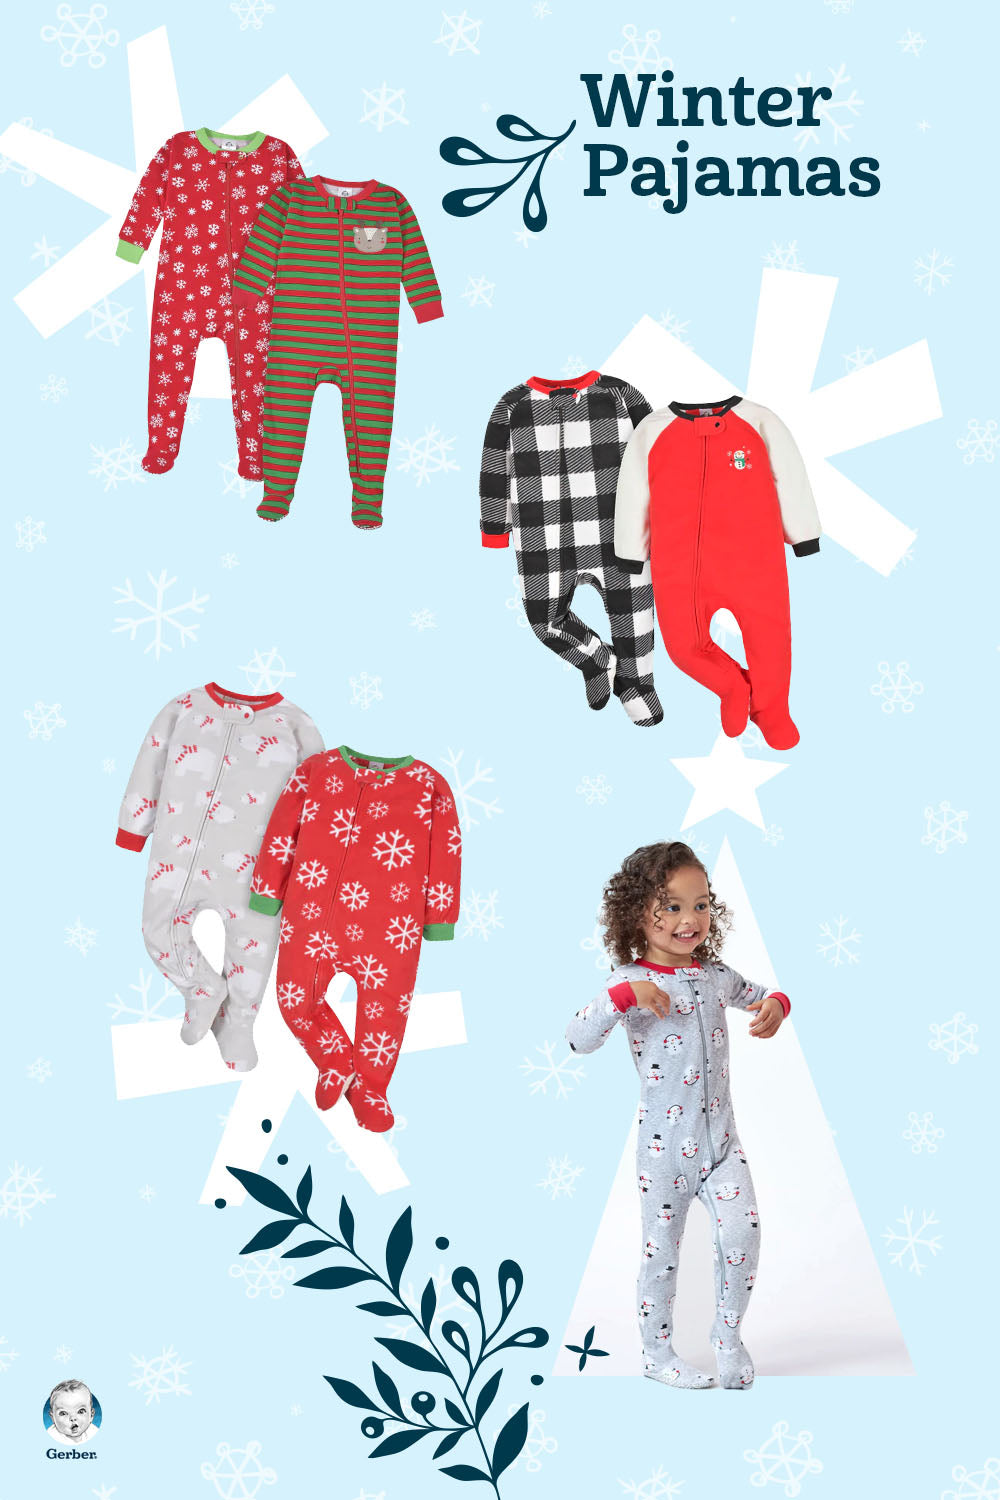 Different winter pajamas with stripes, snowflakes and winter patterns shown in pairs.